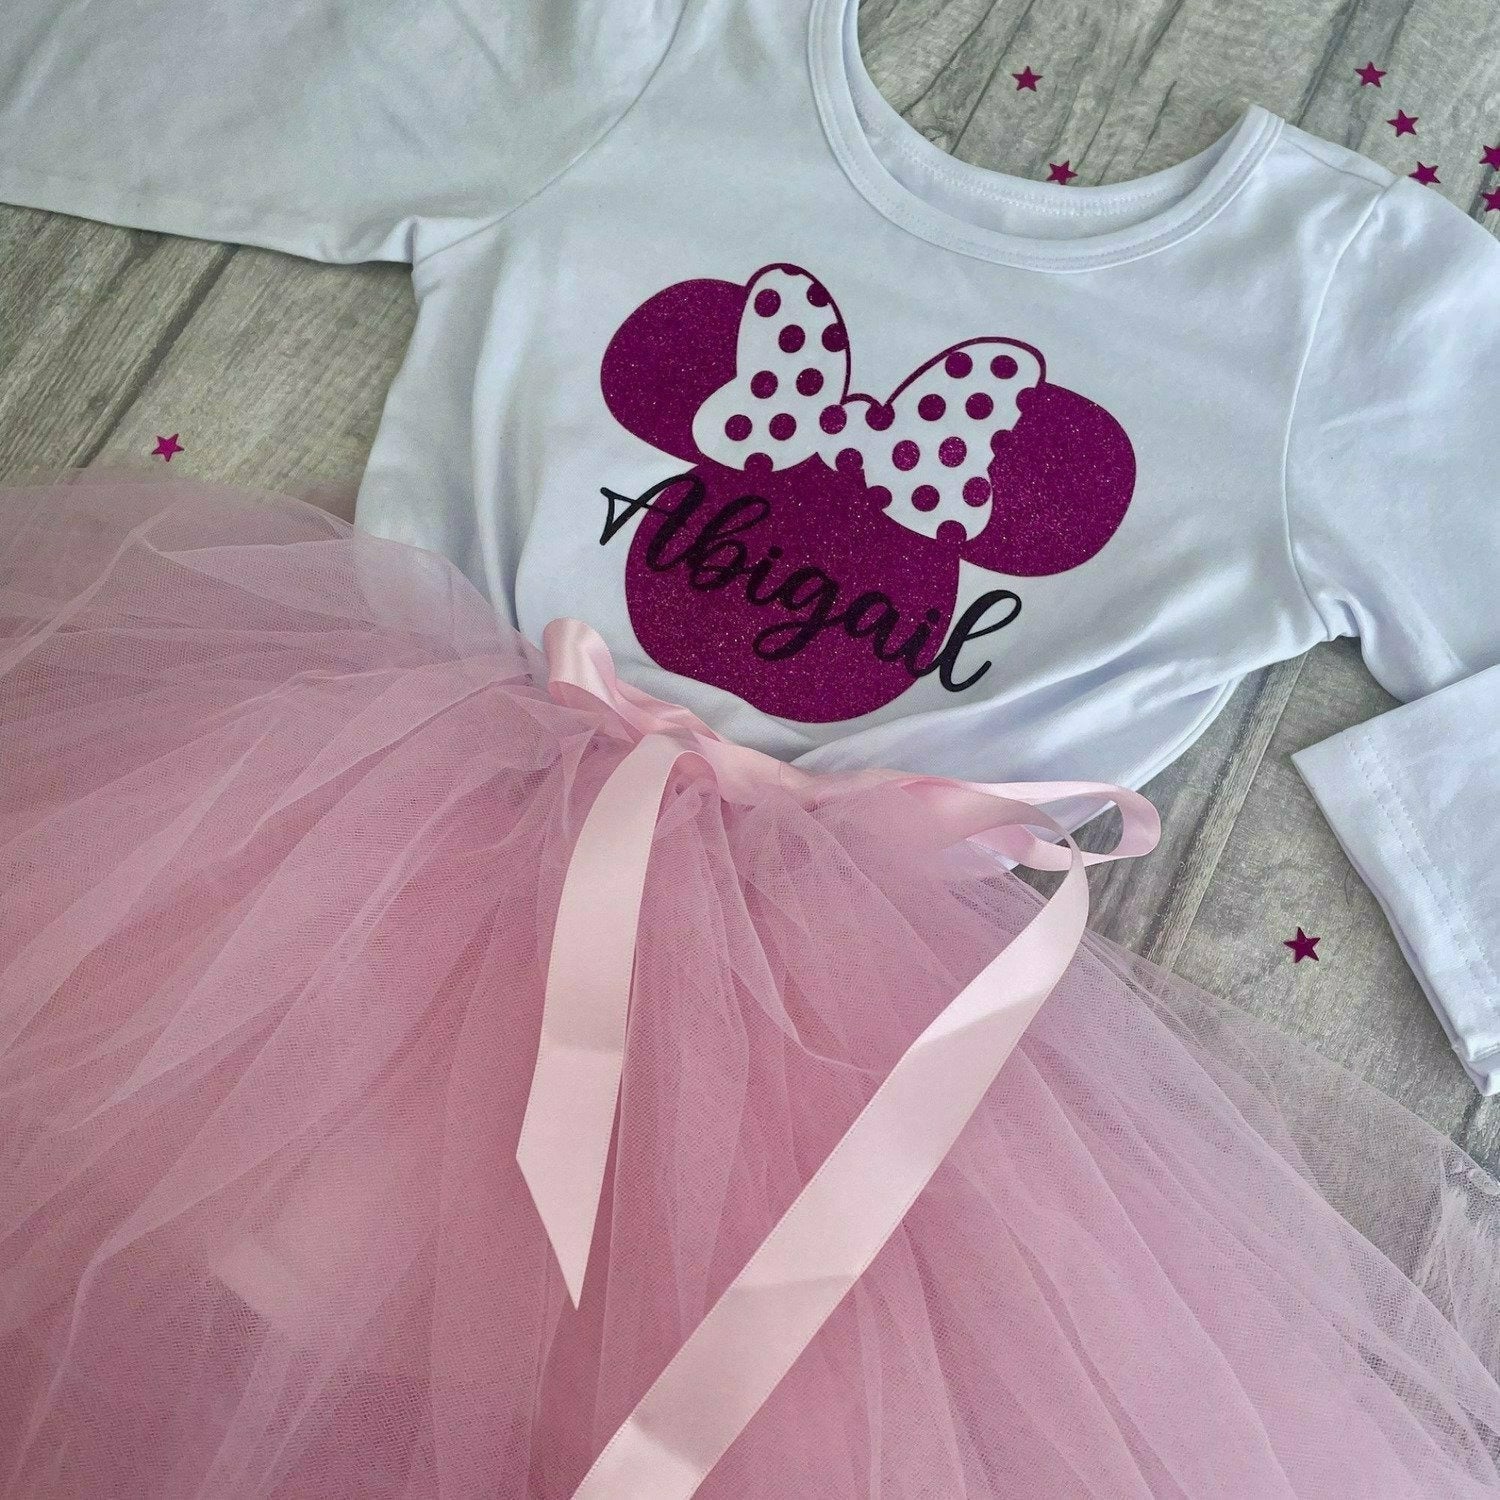 Amazon.com: Mouse Birthday Number Party Dress 3rd Birthday Tutu Outfit  Shirt : Handmade Products